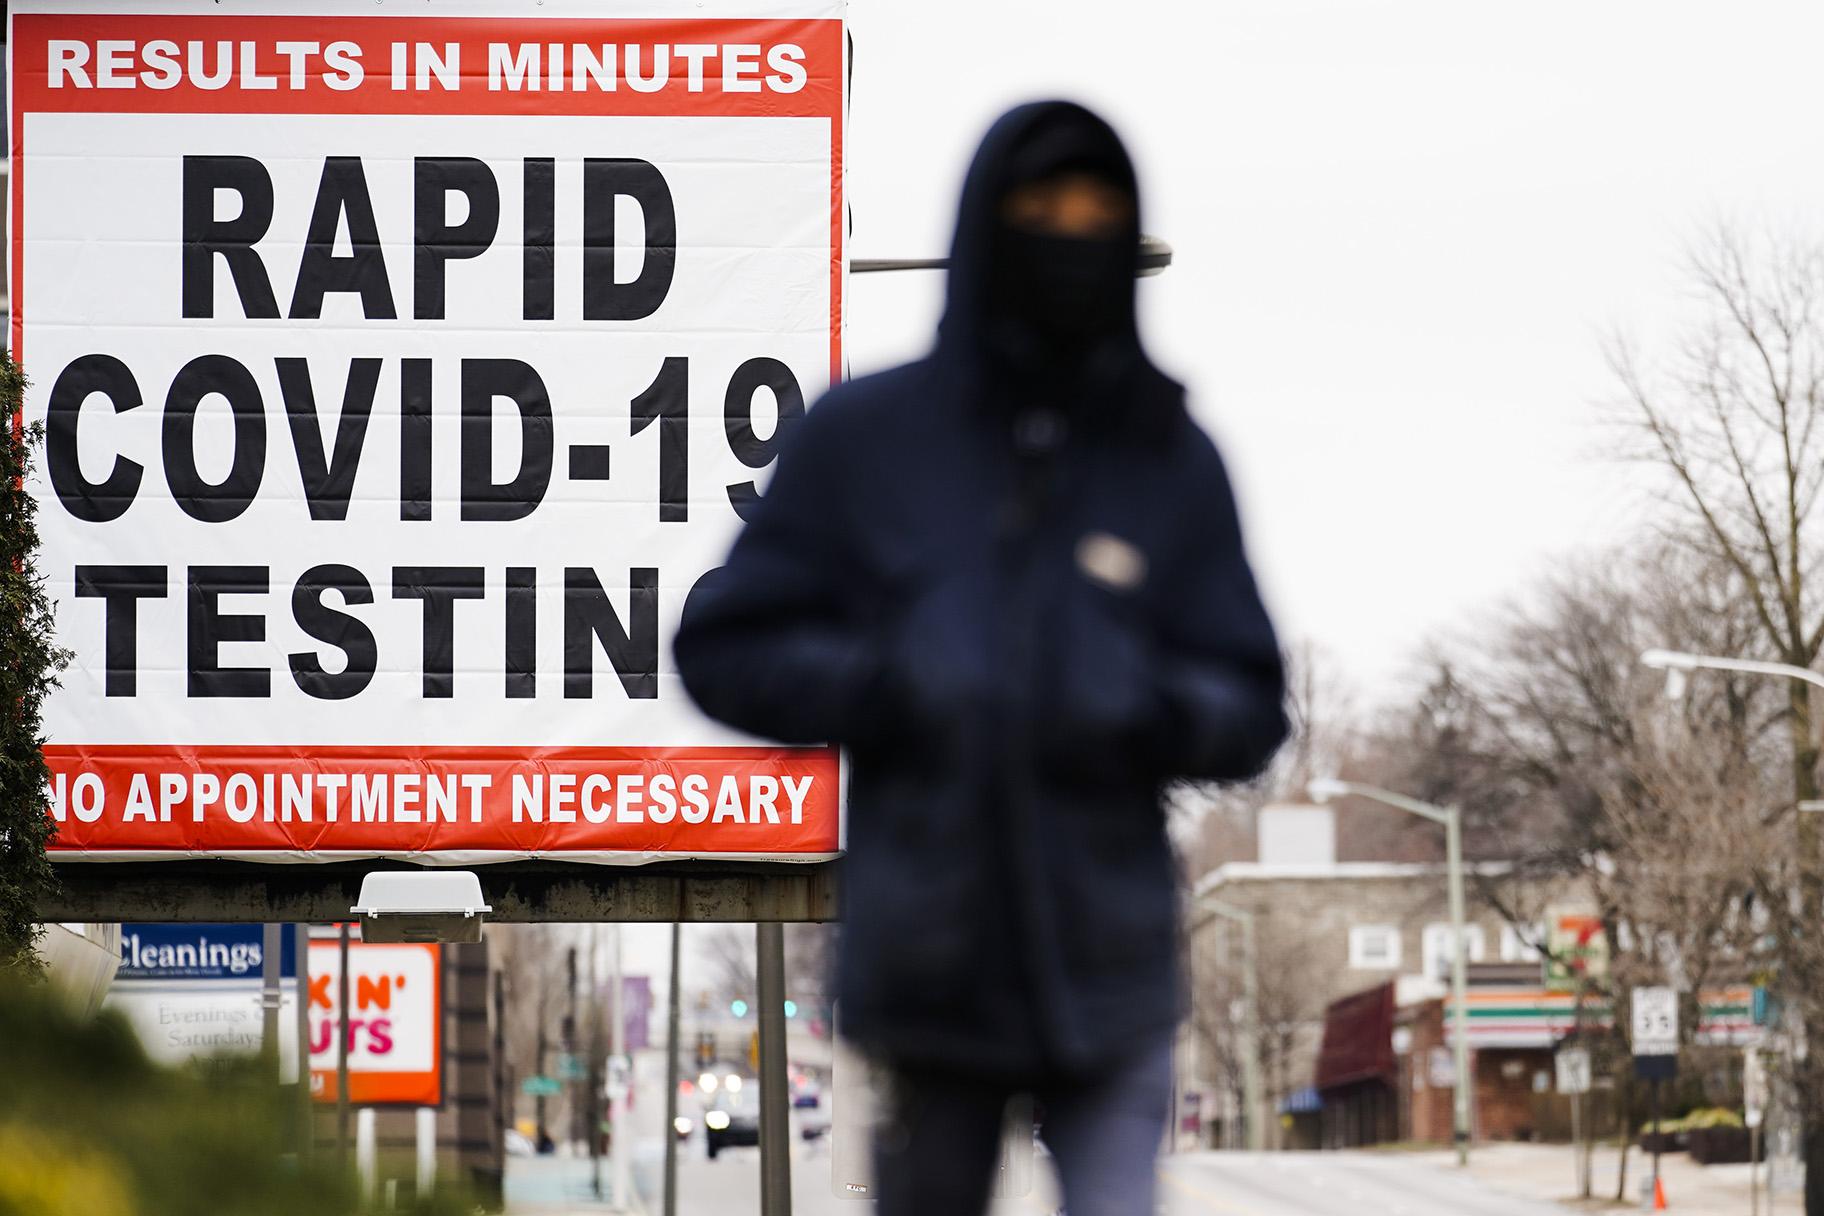 In this Jan. 25, 2021, file photo, a person wearing face mask as a precaution against the coronavirus walks near a sign advertising a rapid COVID-19 testing site in Philadelphia. (AP Photo / Matt Rourke, File)